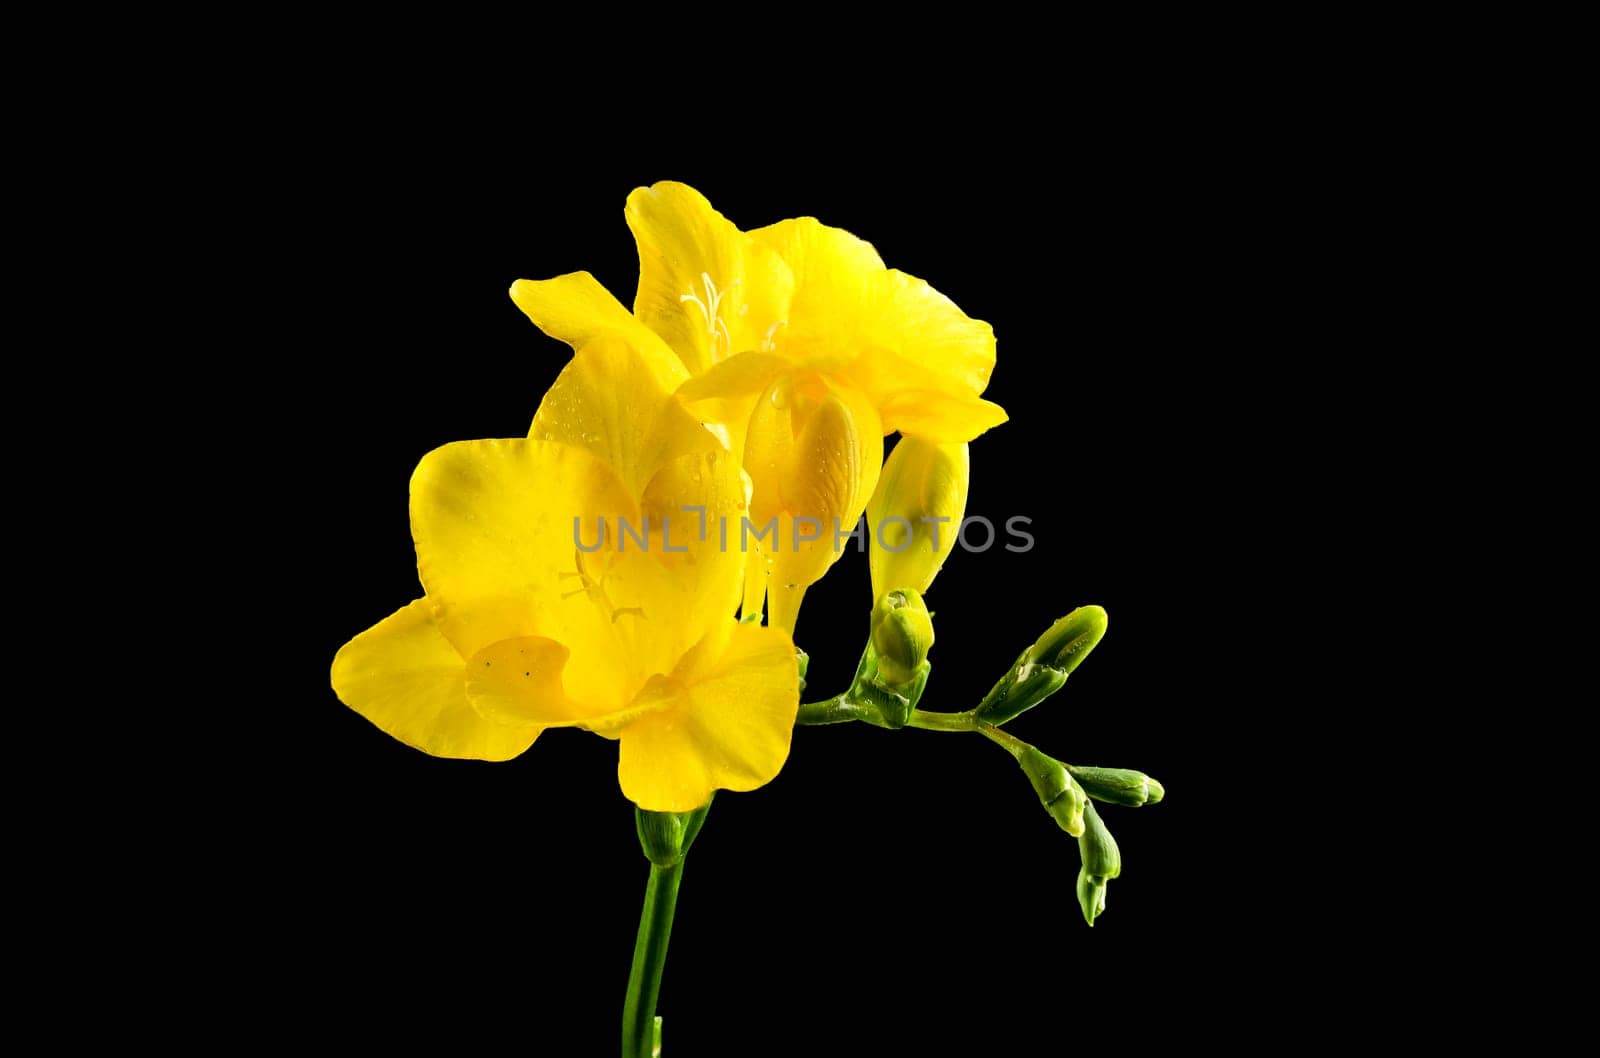 Beautiful Yellow freesia flower on a black background. Flower head close-up.